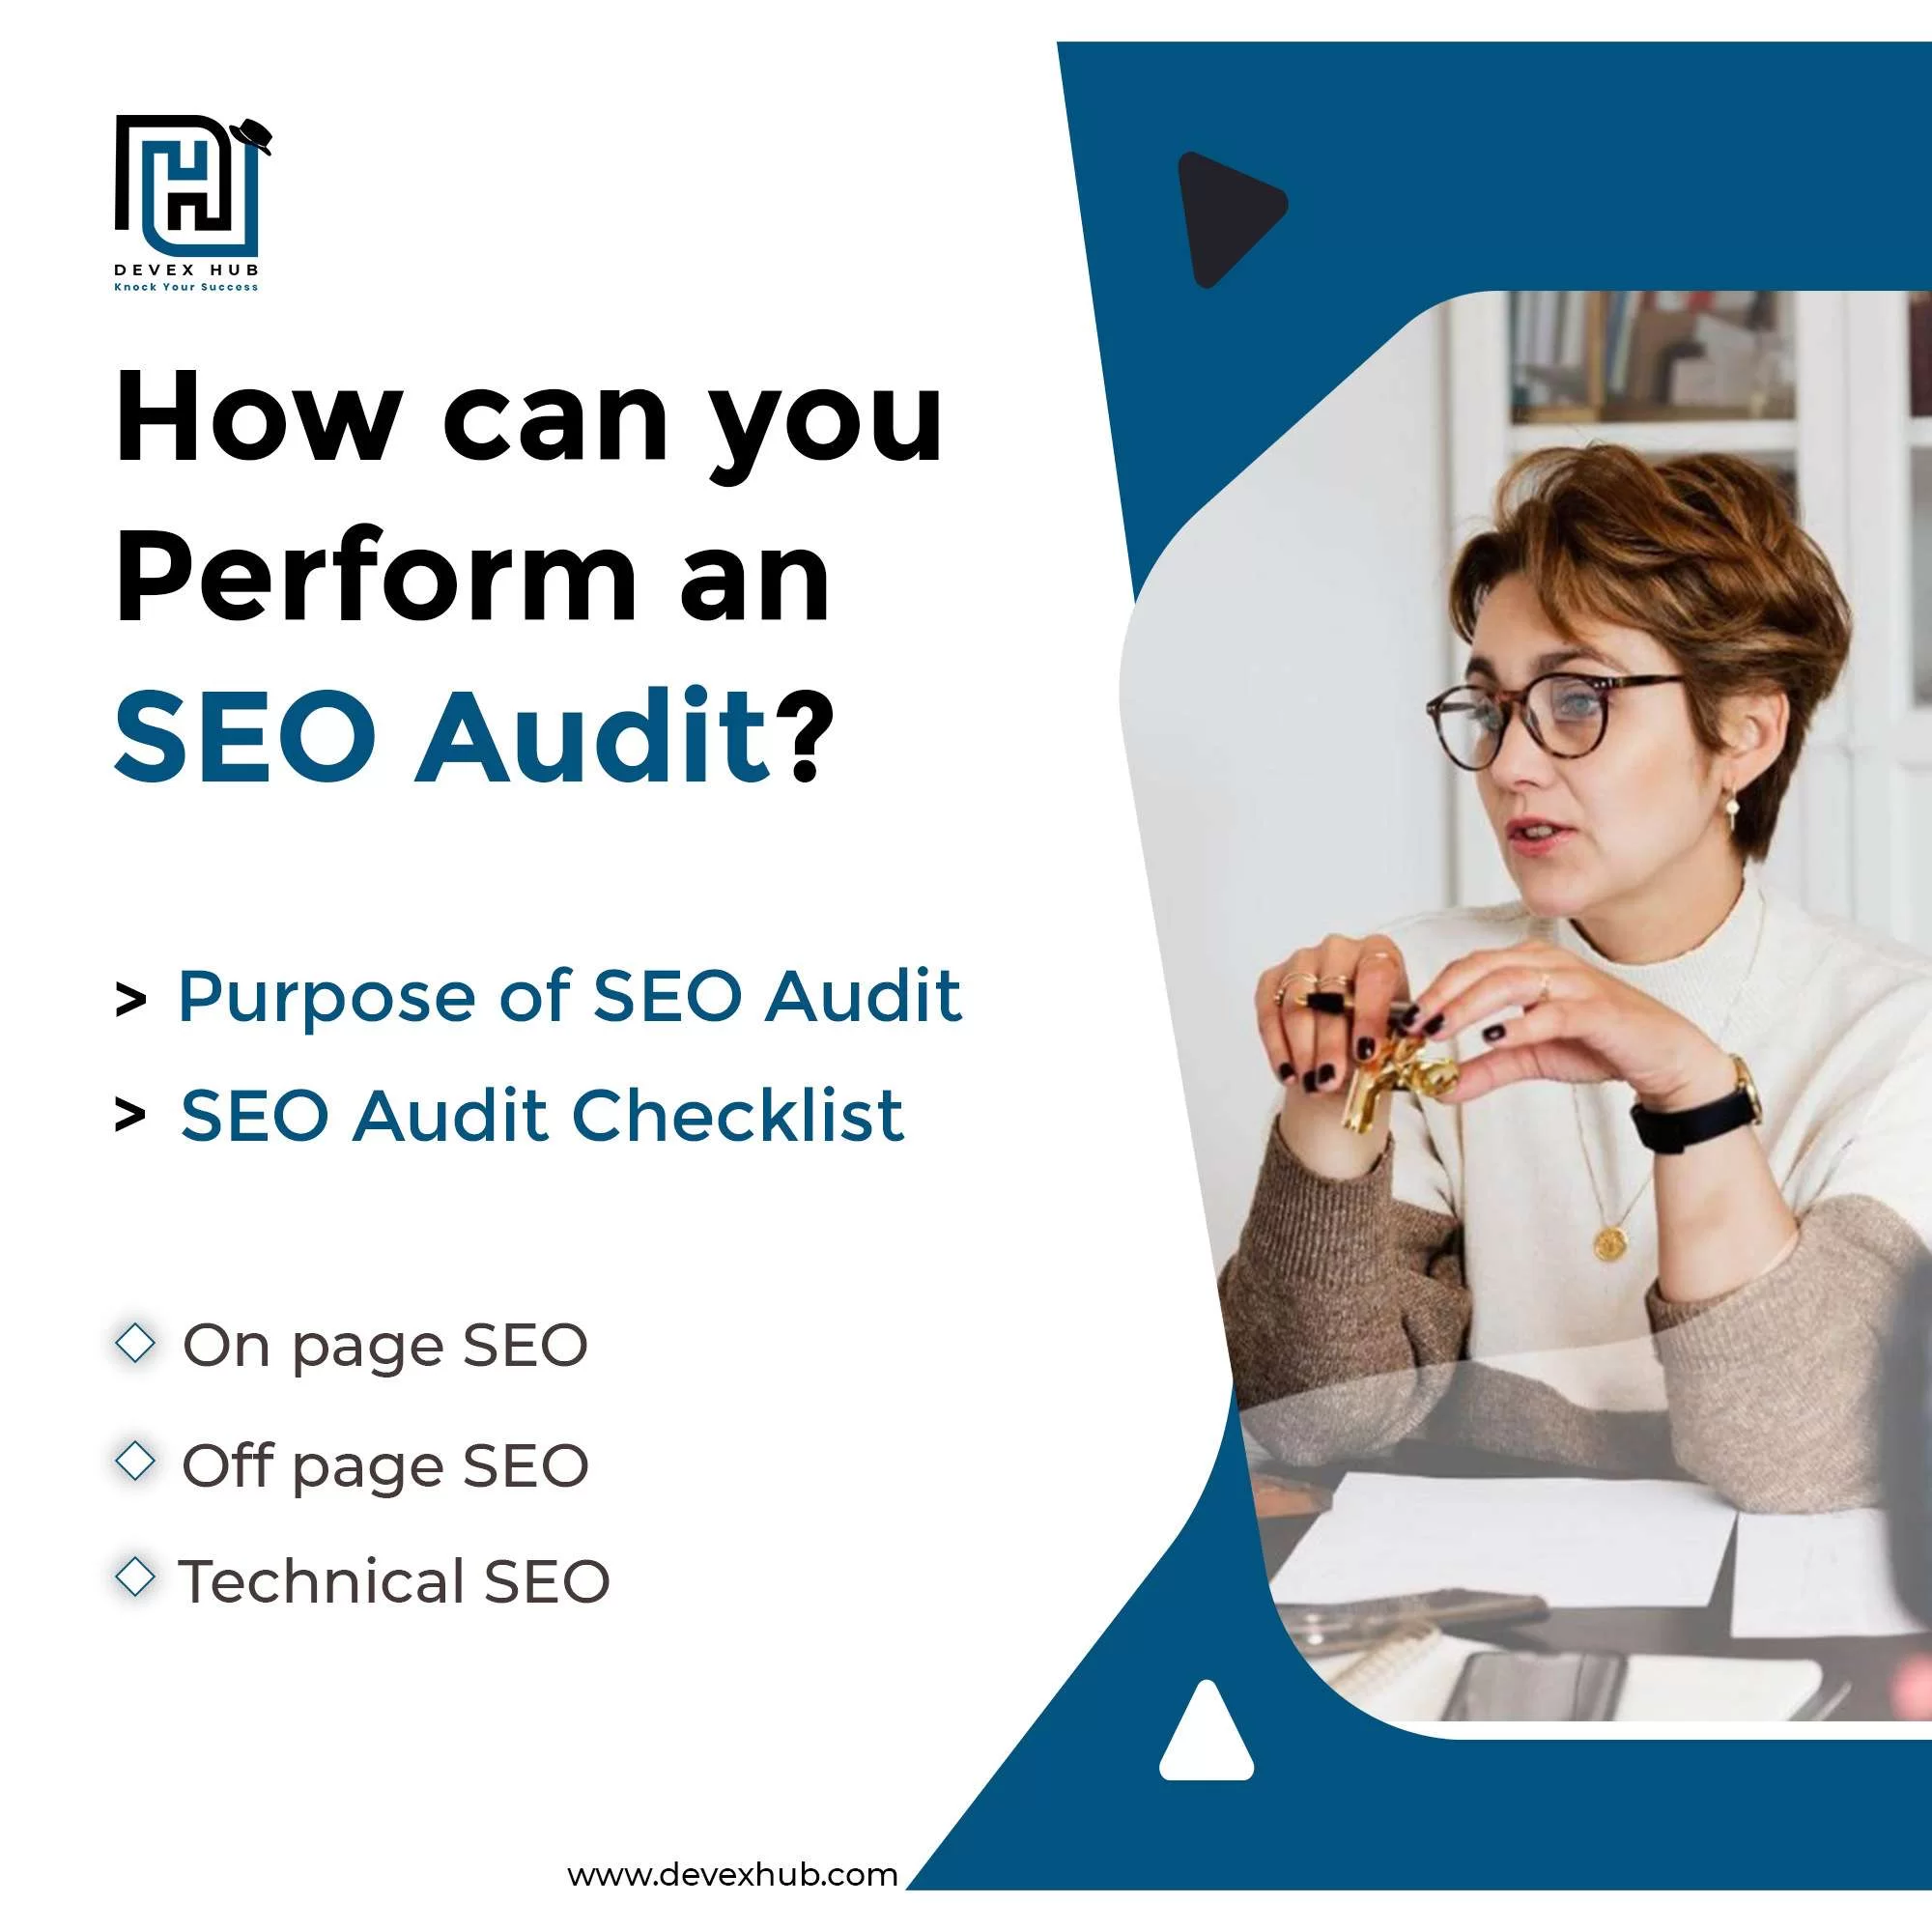 How can you Perform an SEO Audit?